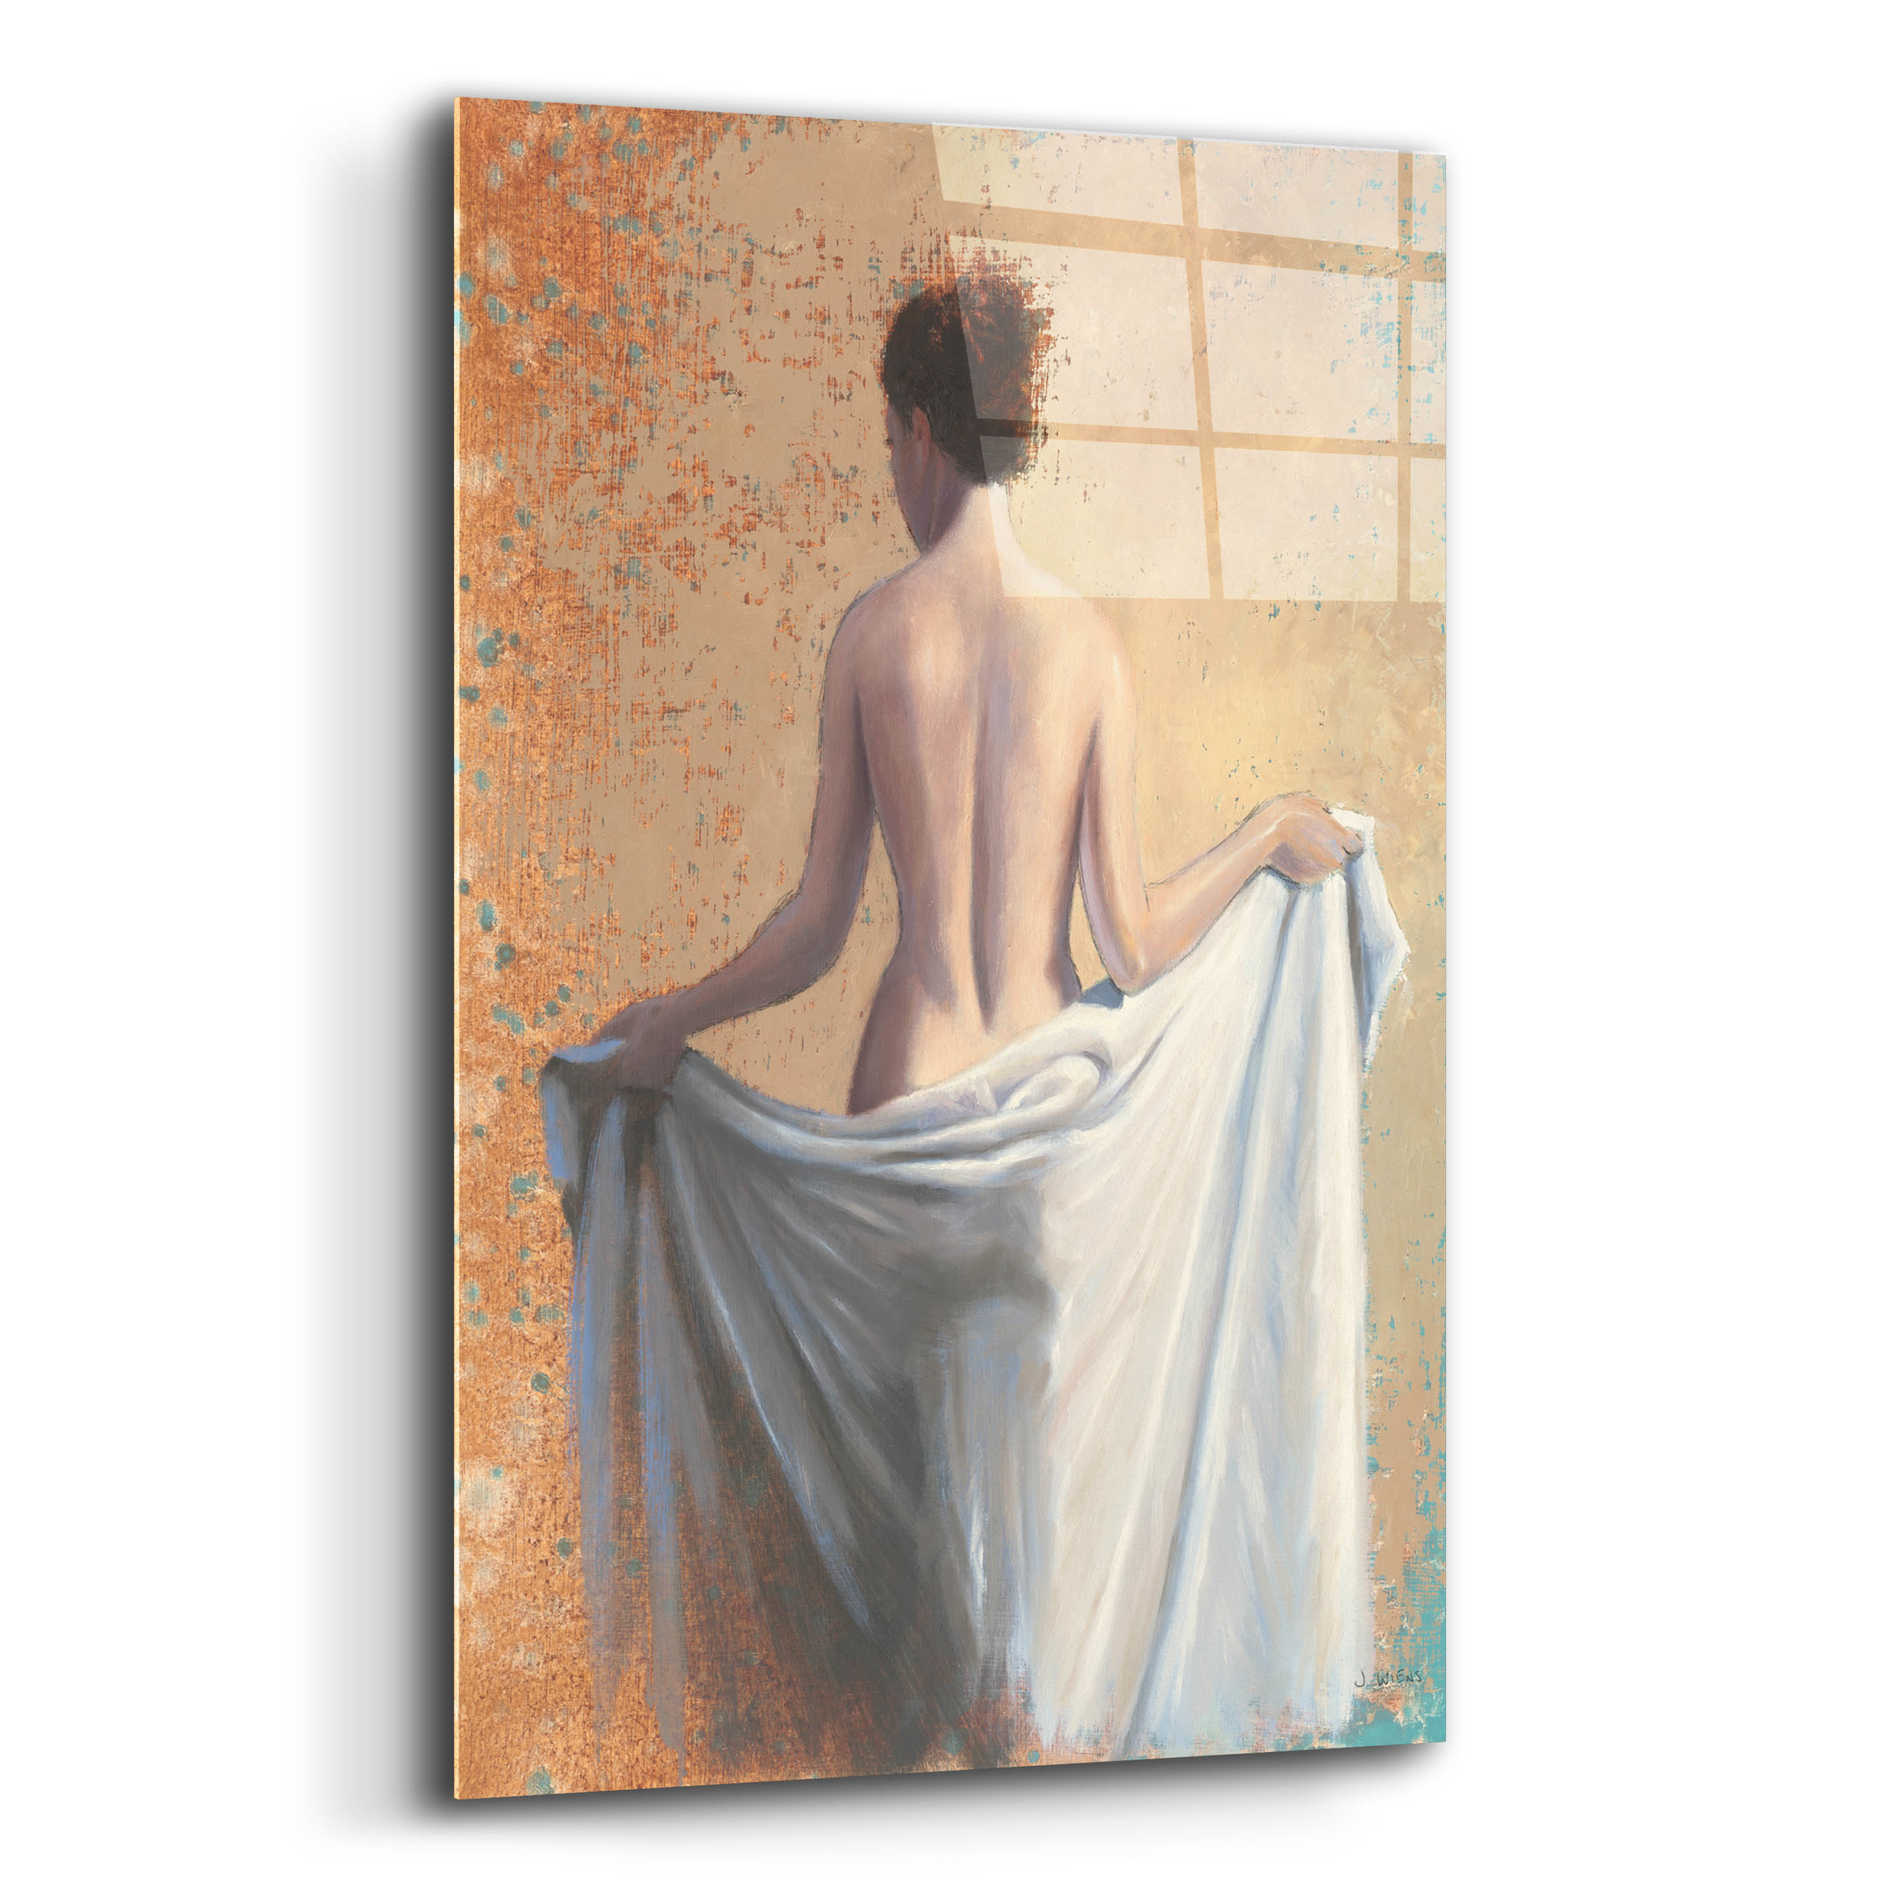 Epic Art 'After the Bath Coral' by James Wiens, Acrylic Glass Wall Art,16x24